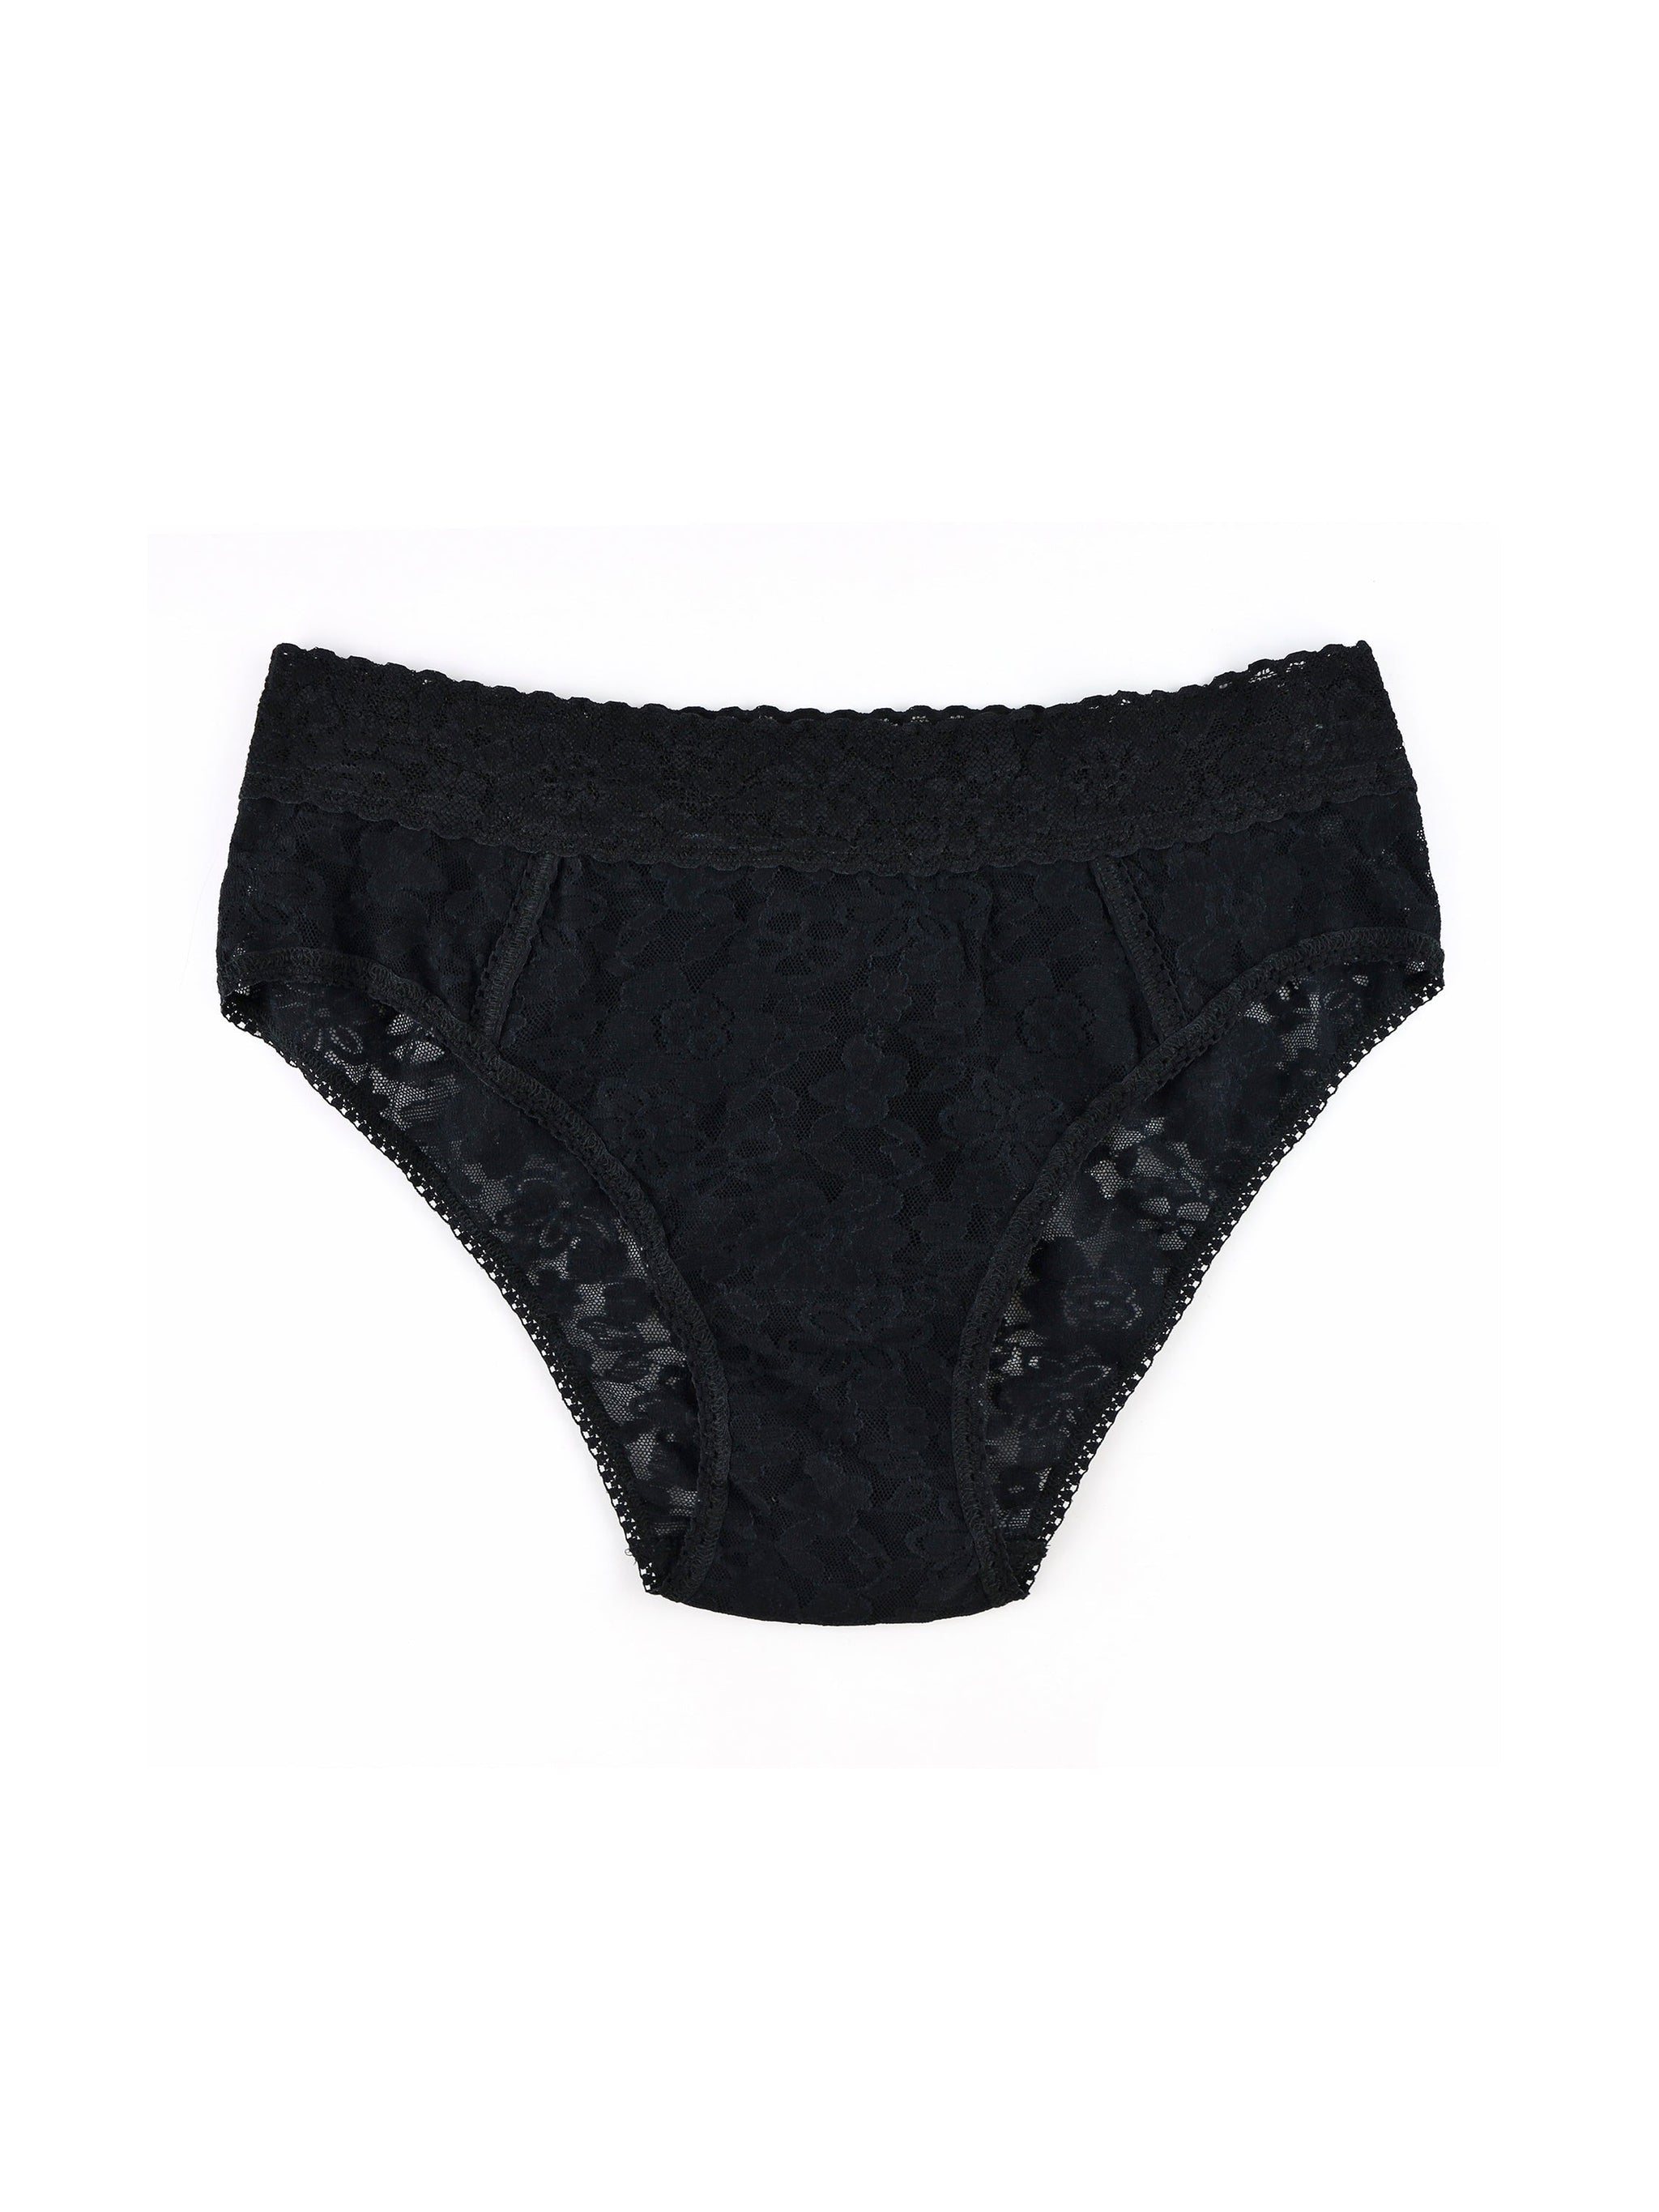 Daily Lace™ Cheeky Brief Black